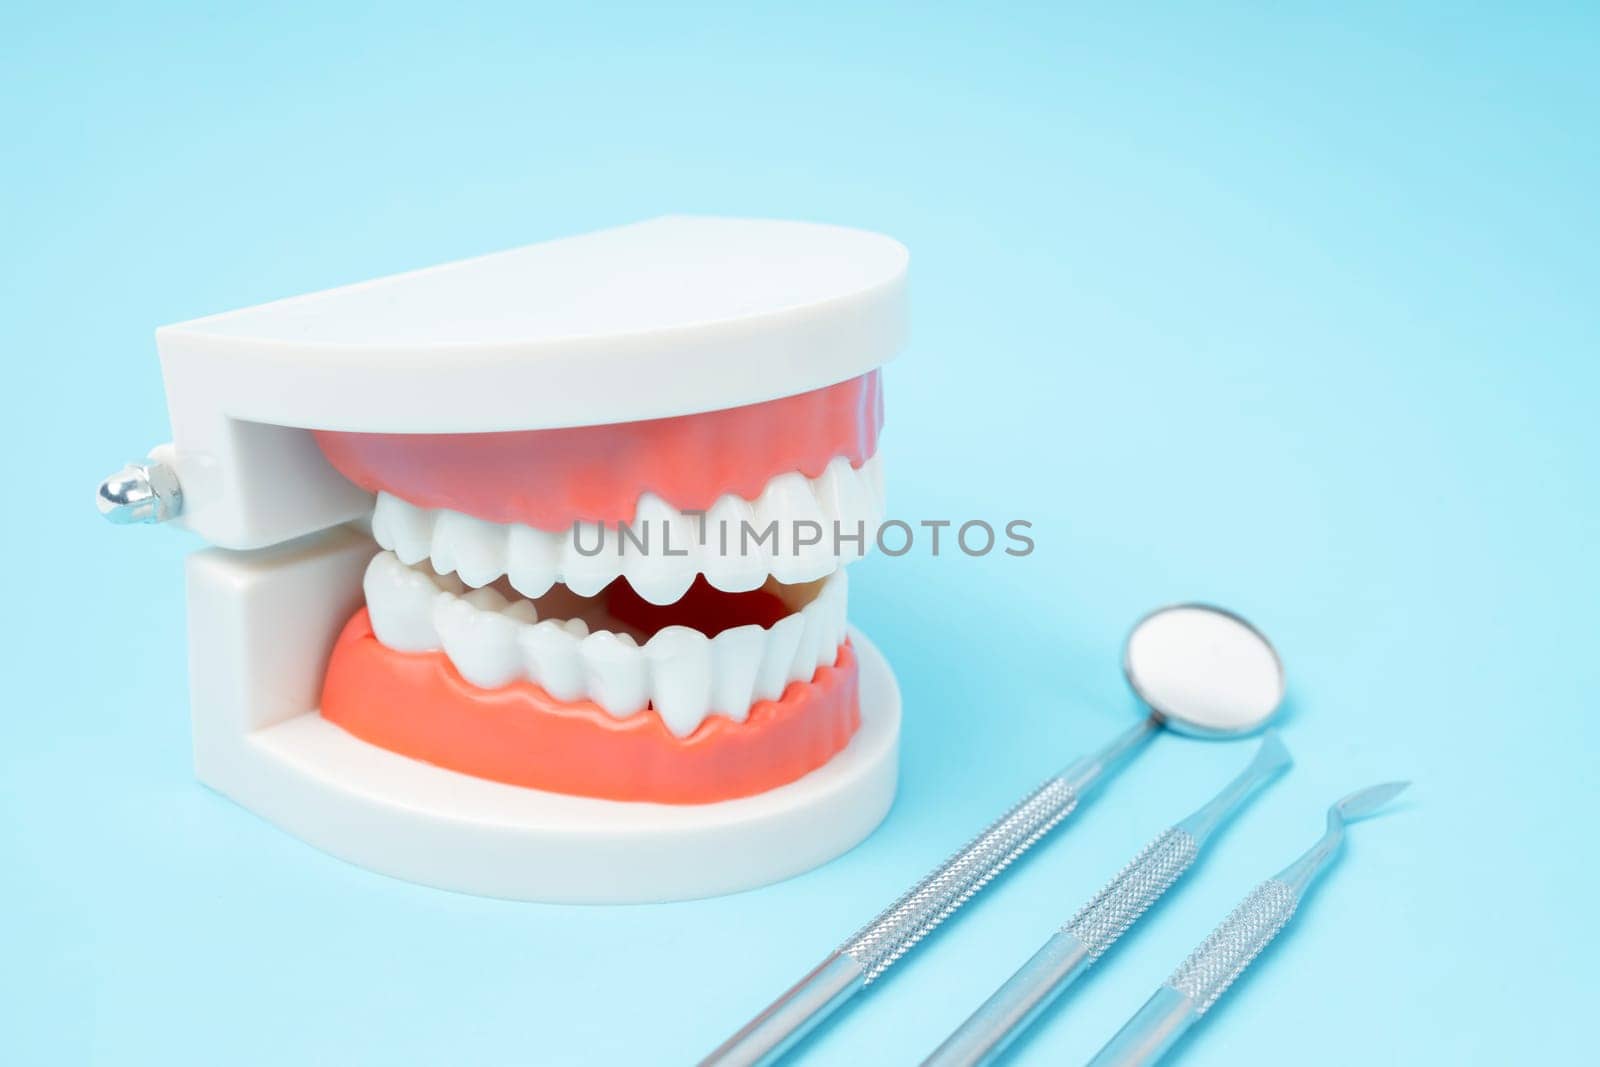 The Dentures model and instrument dental on blue background. by Gamjai